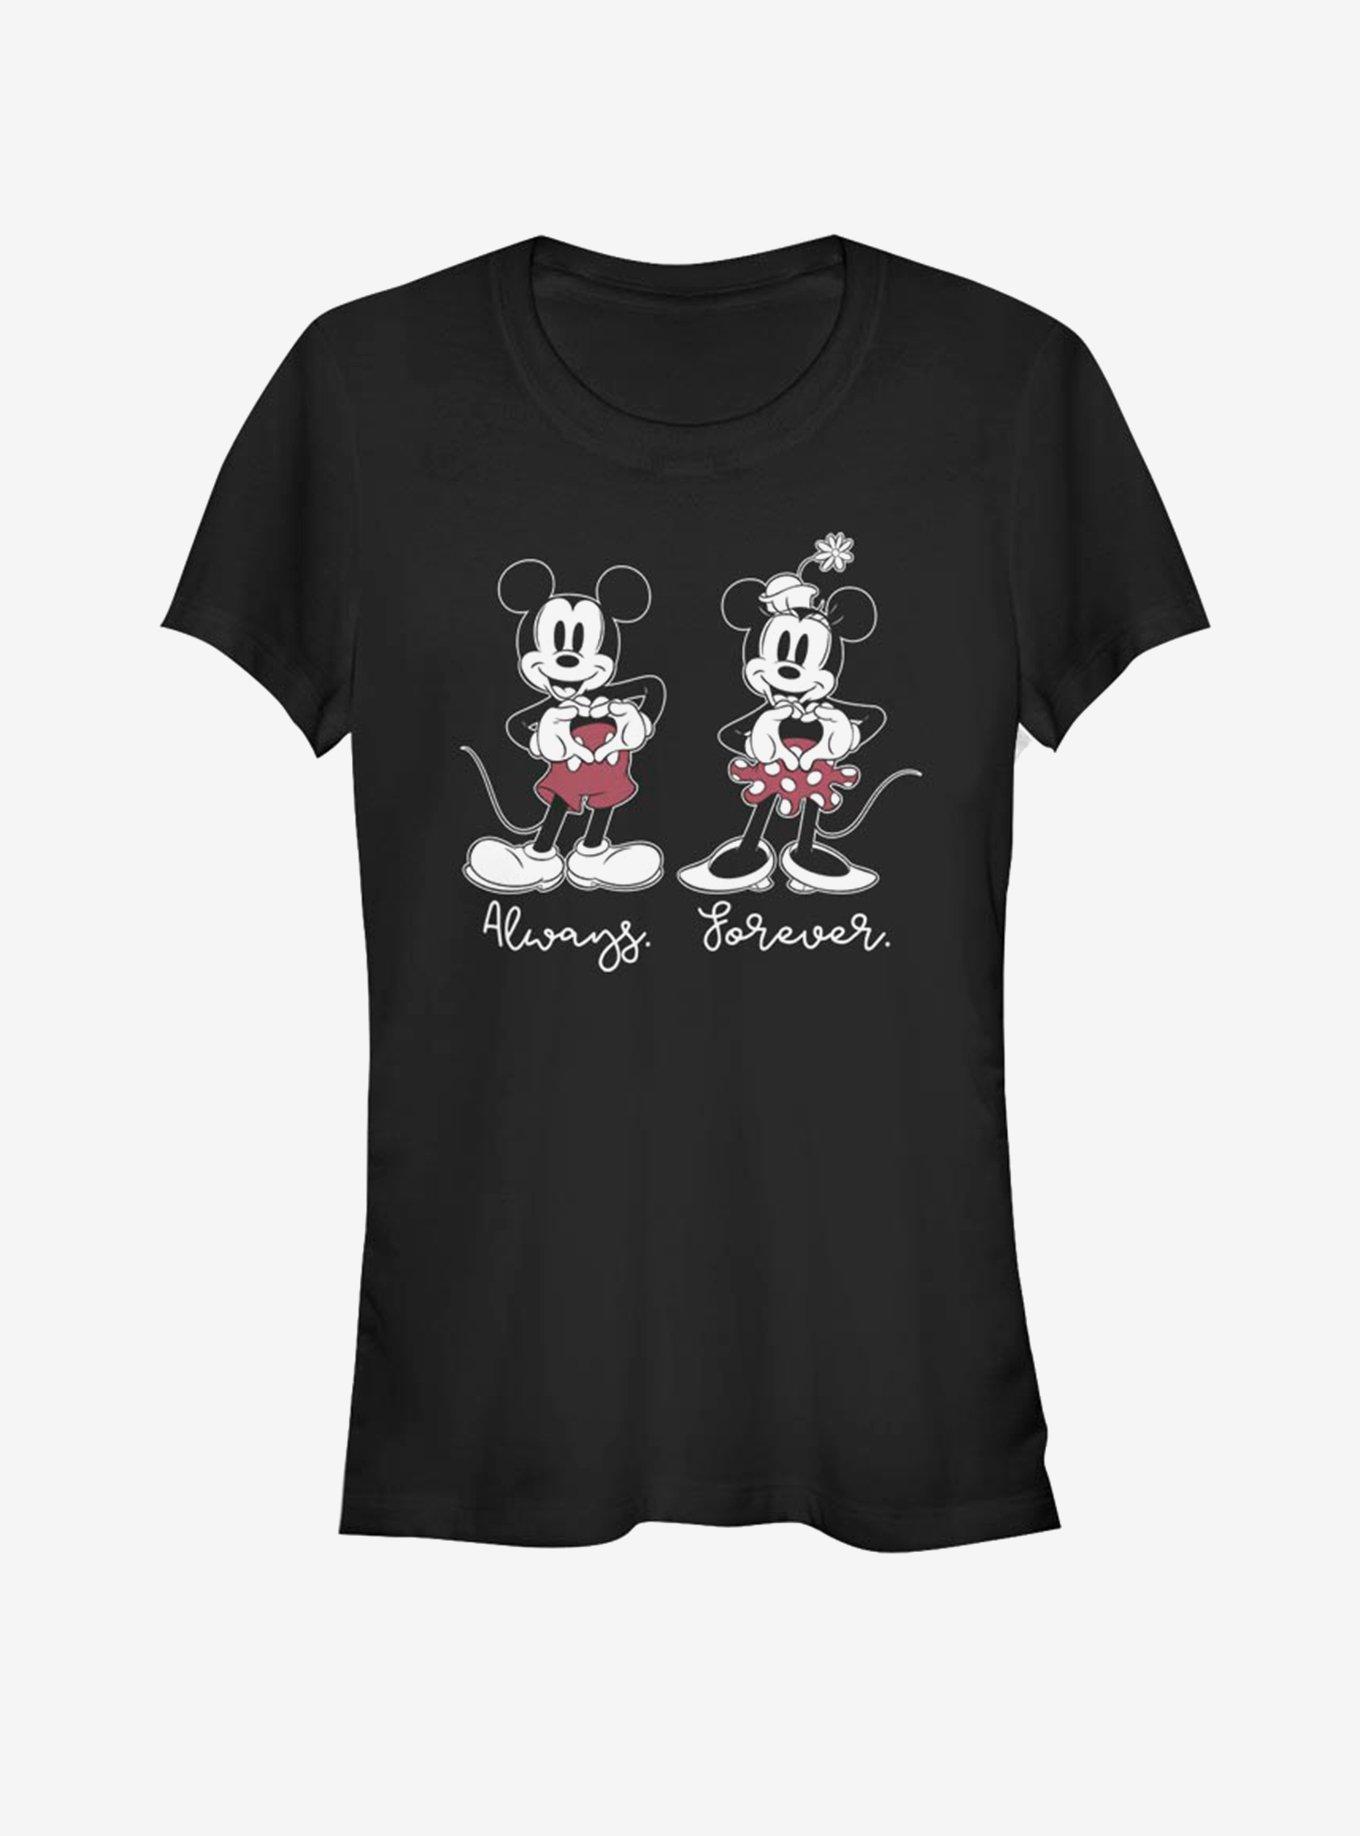 Disney Mickey Mouse & Minnie Mouse Always Forever Girls T-Shirt, BLACK, hi-res